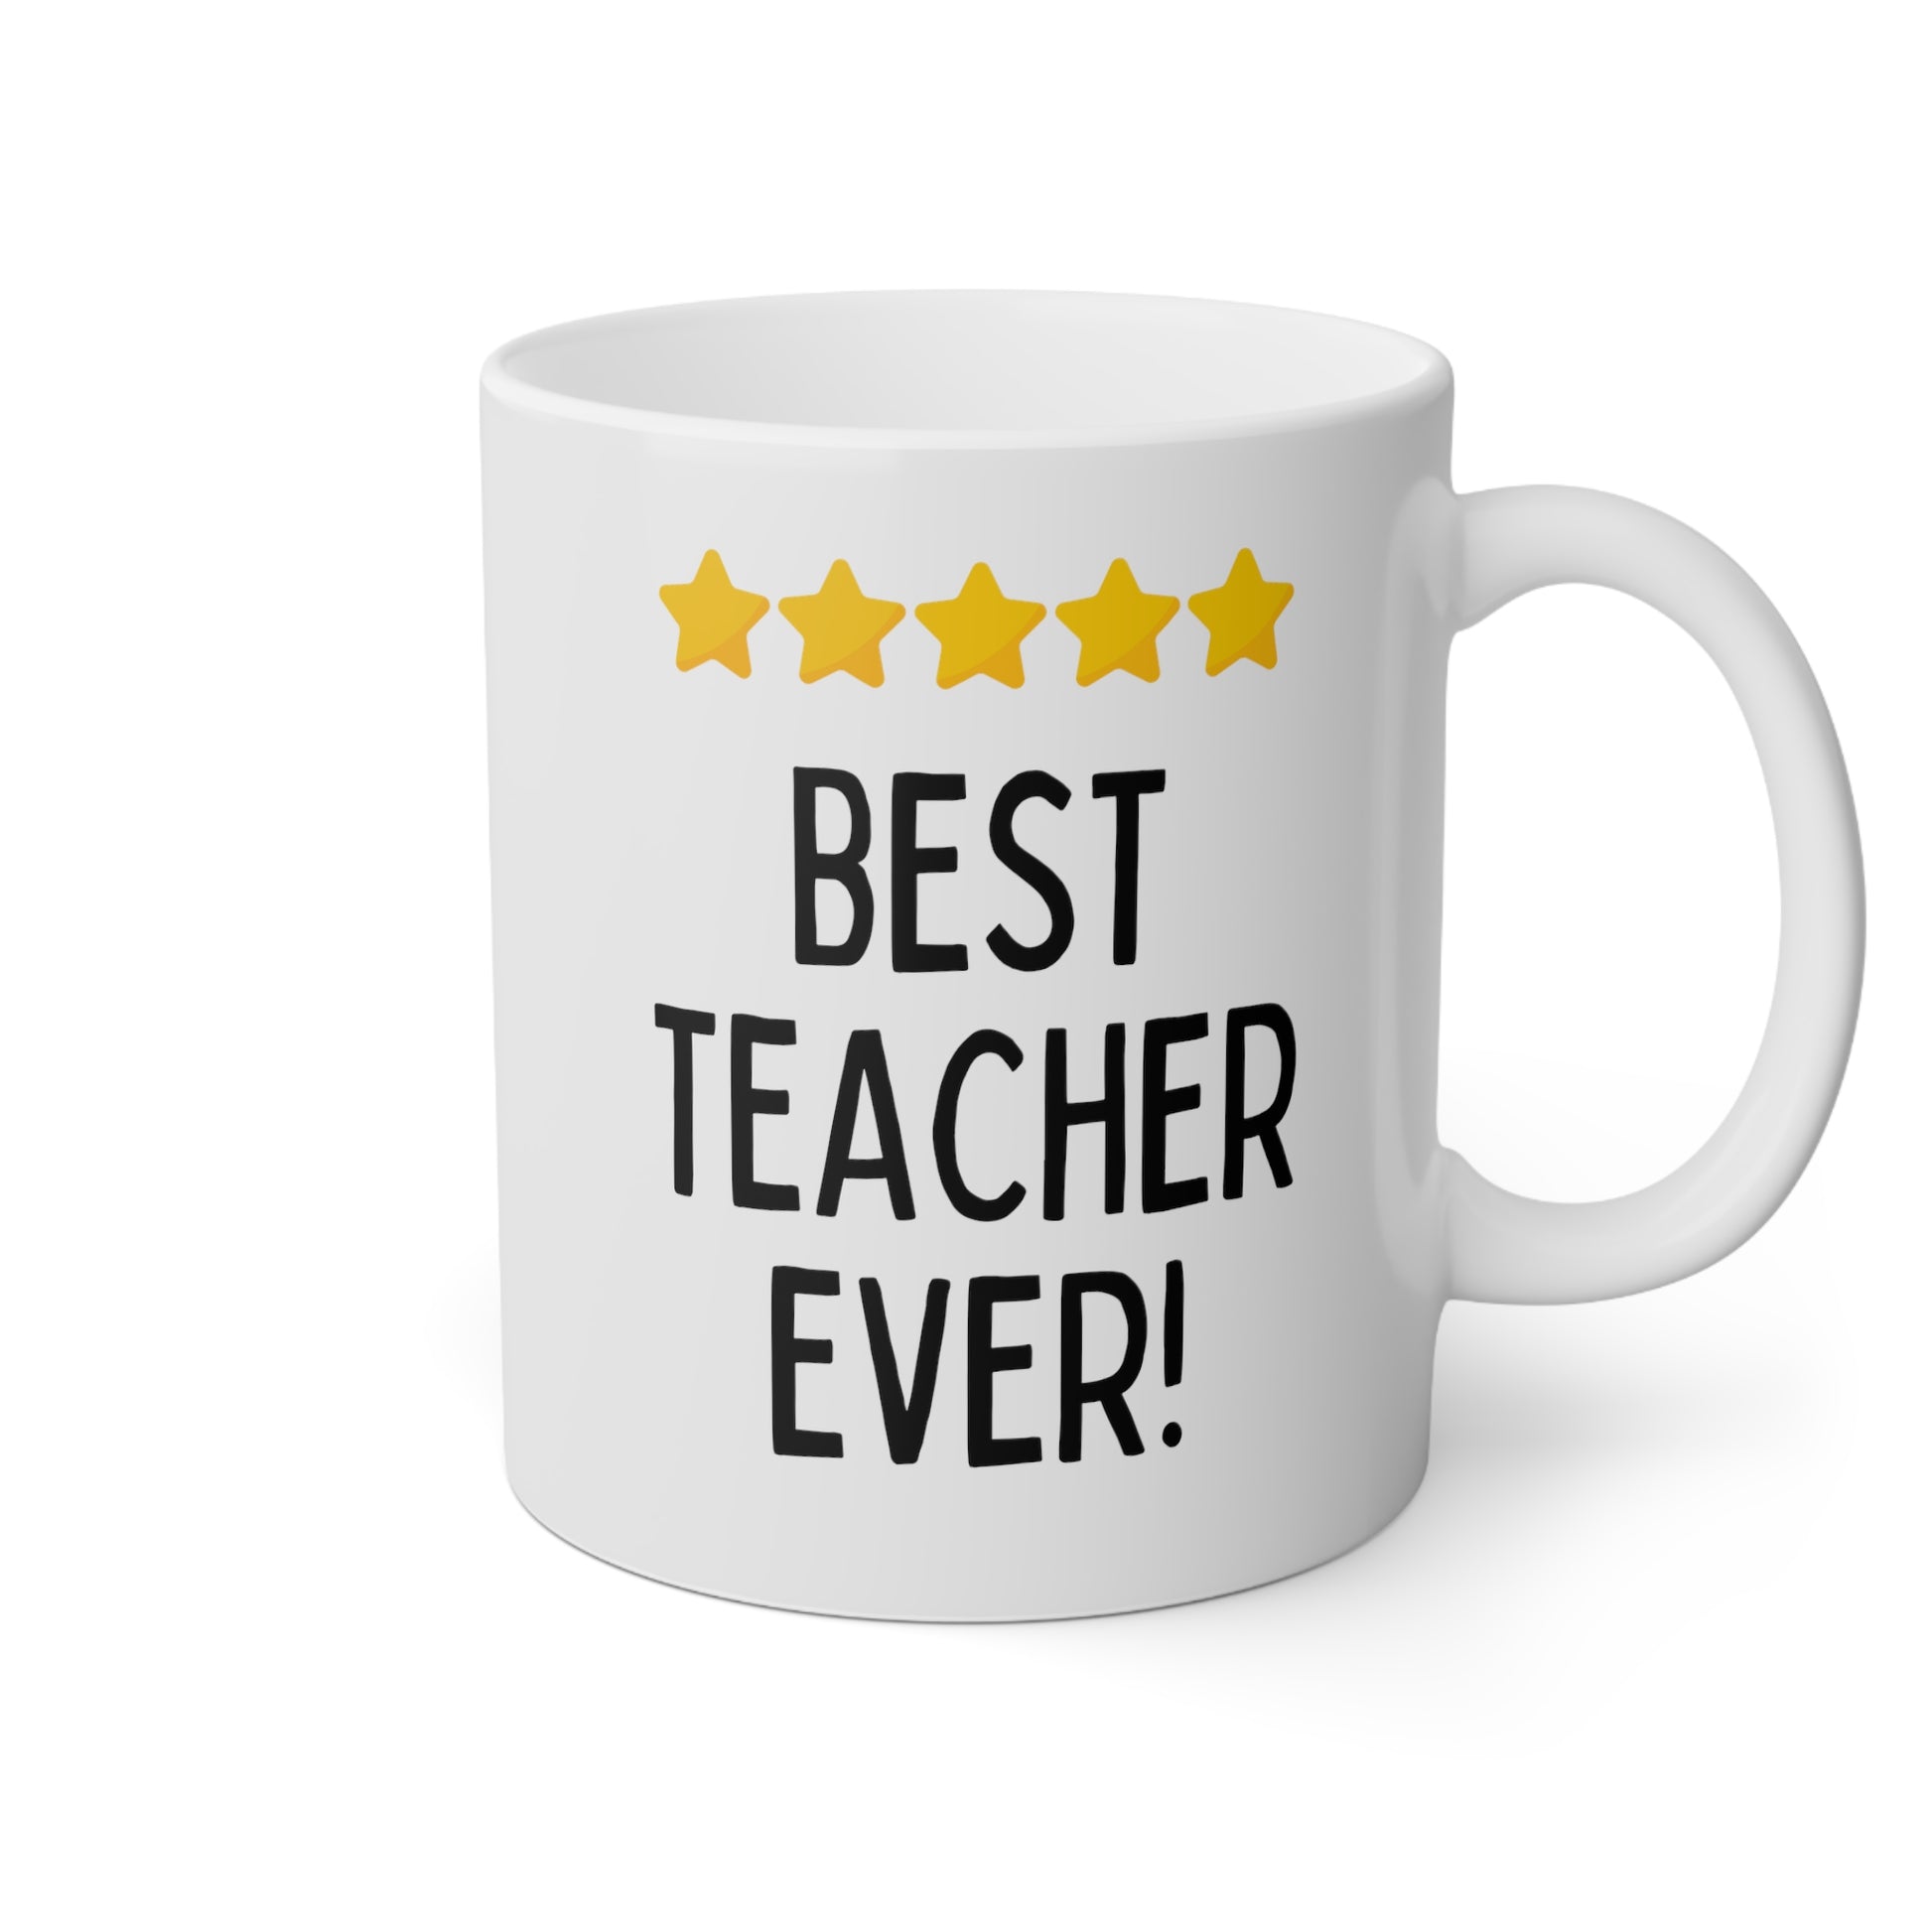 Best Teacher Ever 11oz white funny large coffee mug gift for educator teaching assistant end of the year present professor tutor five stars waveywares wavey wares wavywares wavy wares